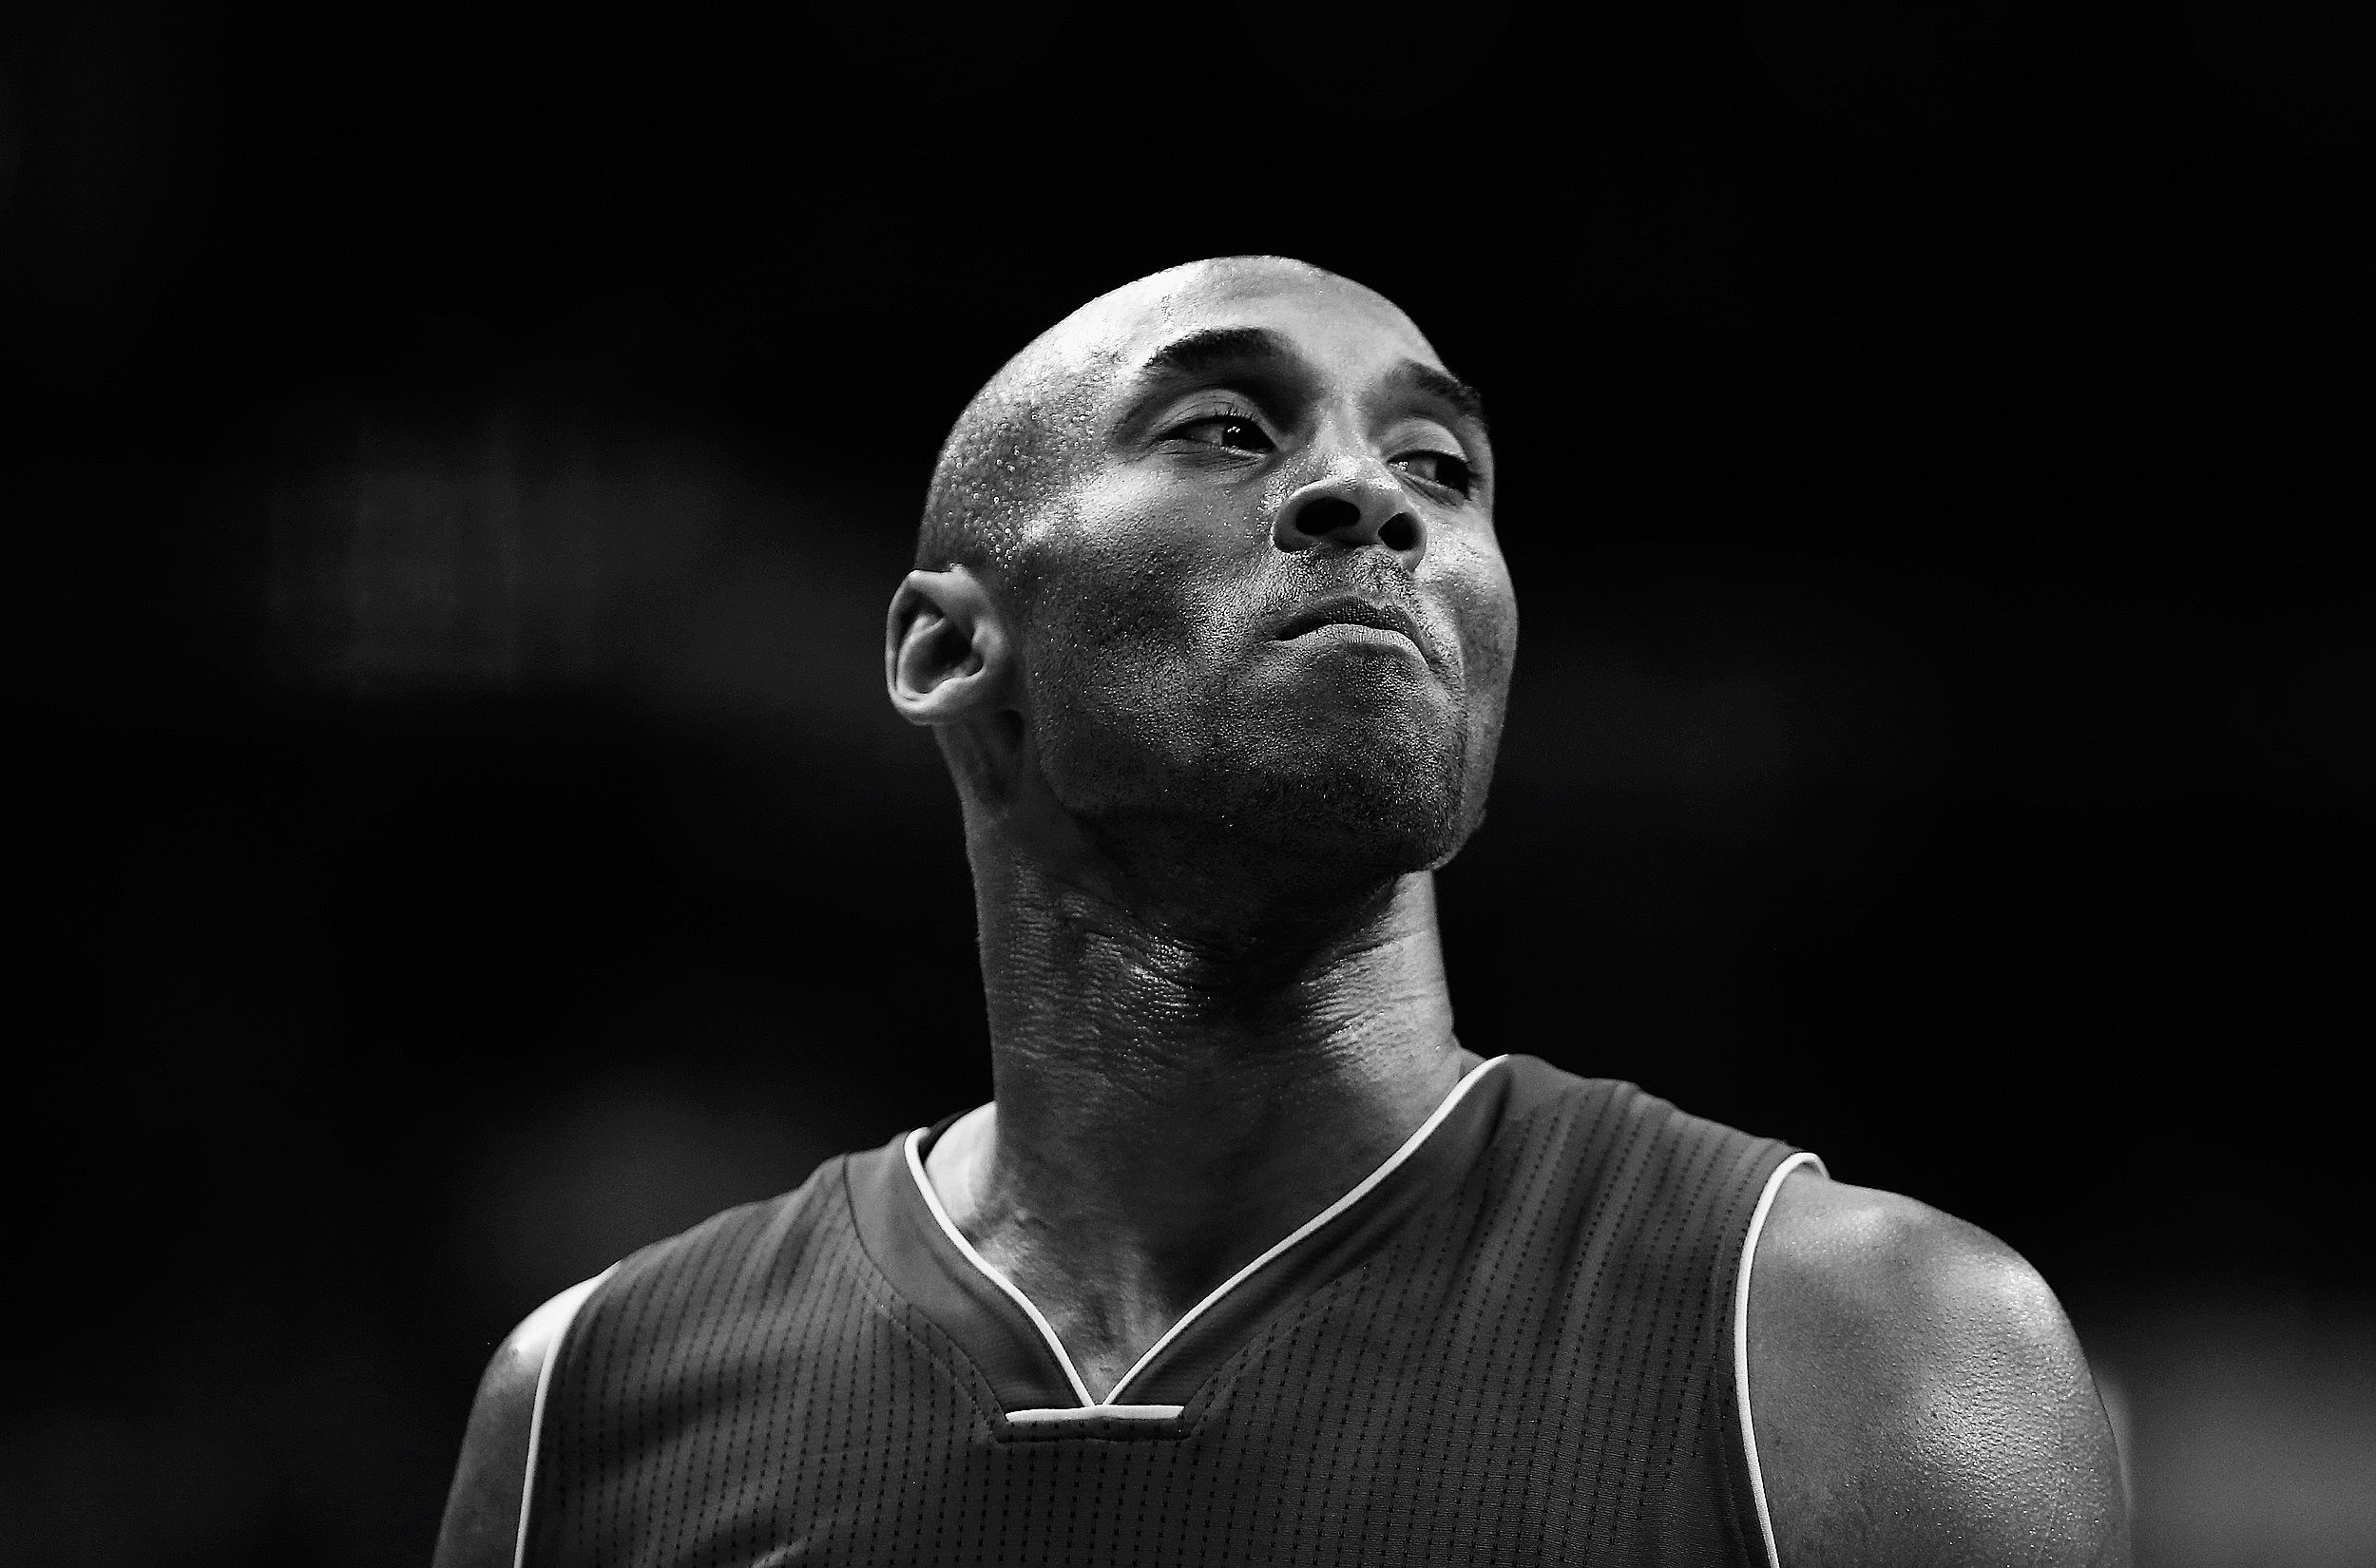 Dr. Dre's Tribute to Kobe Bryant at NBA All-Star Game (VIDEO